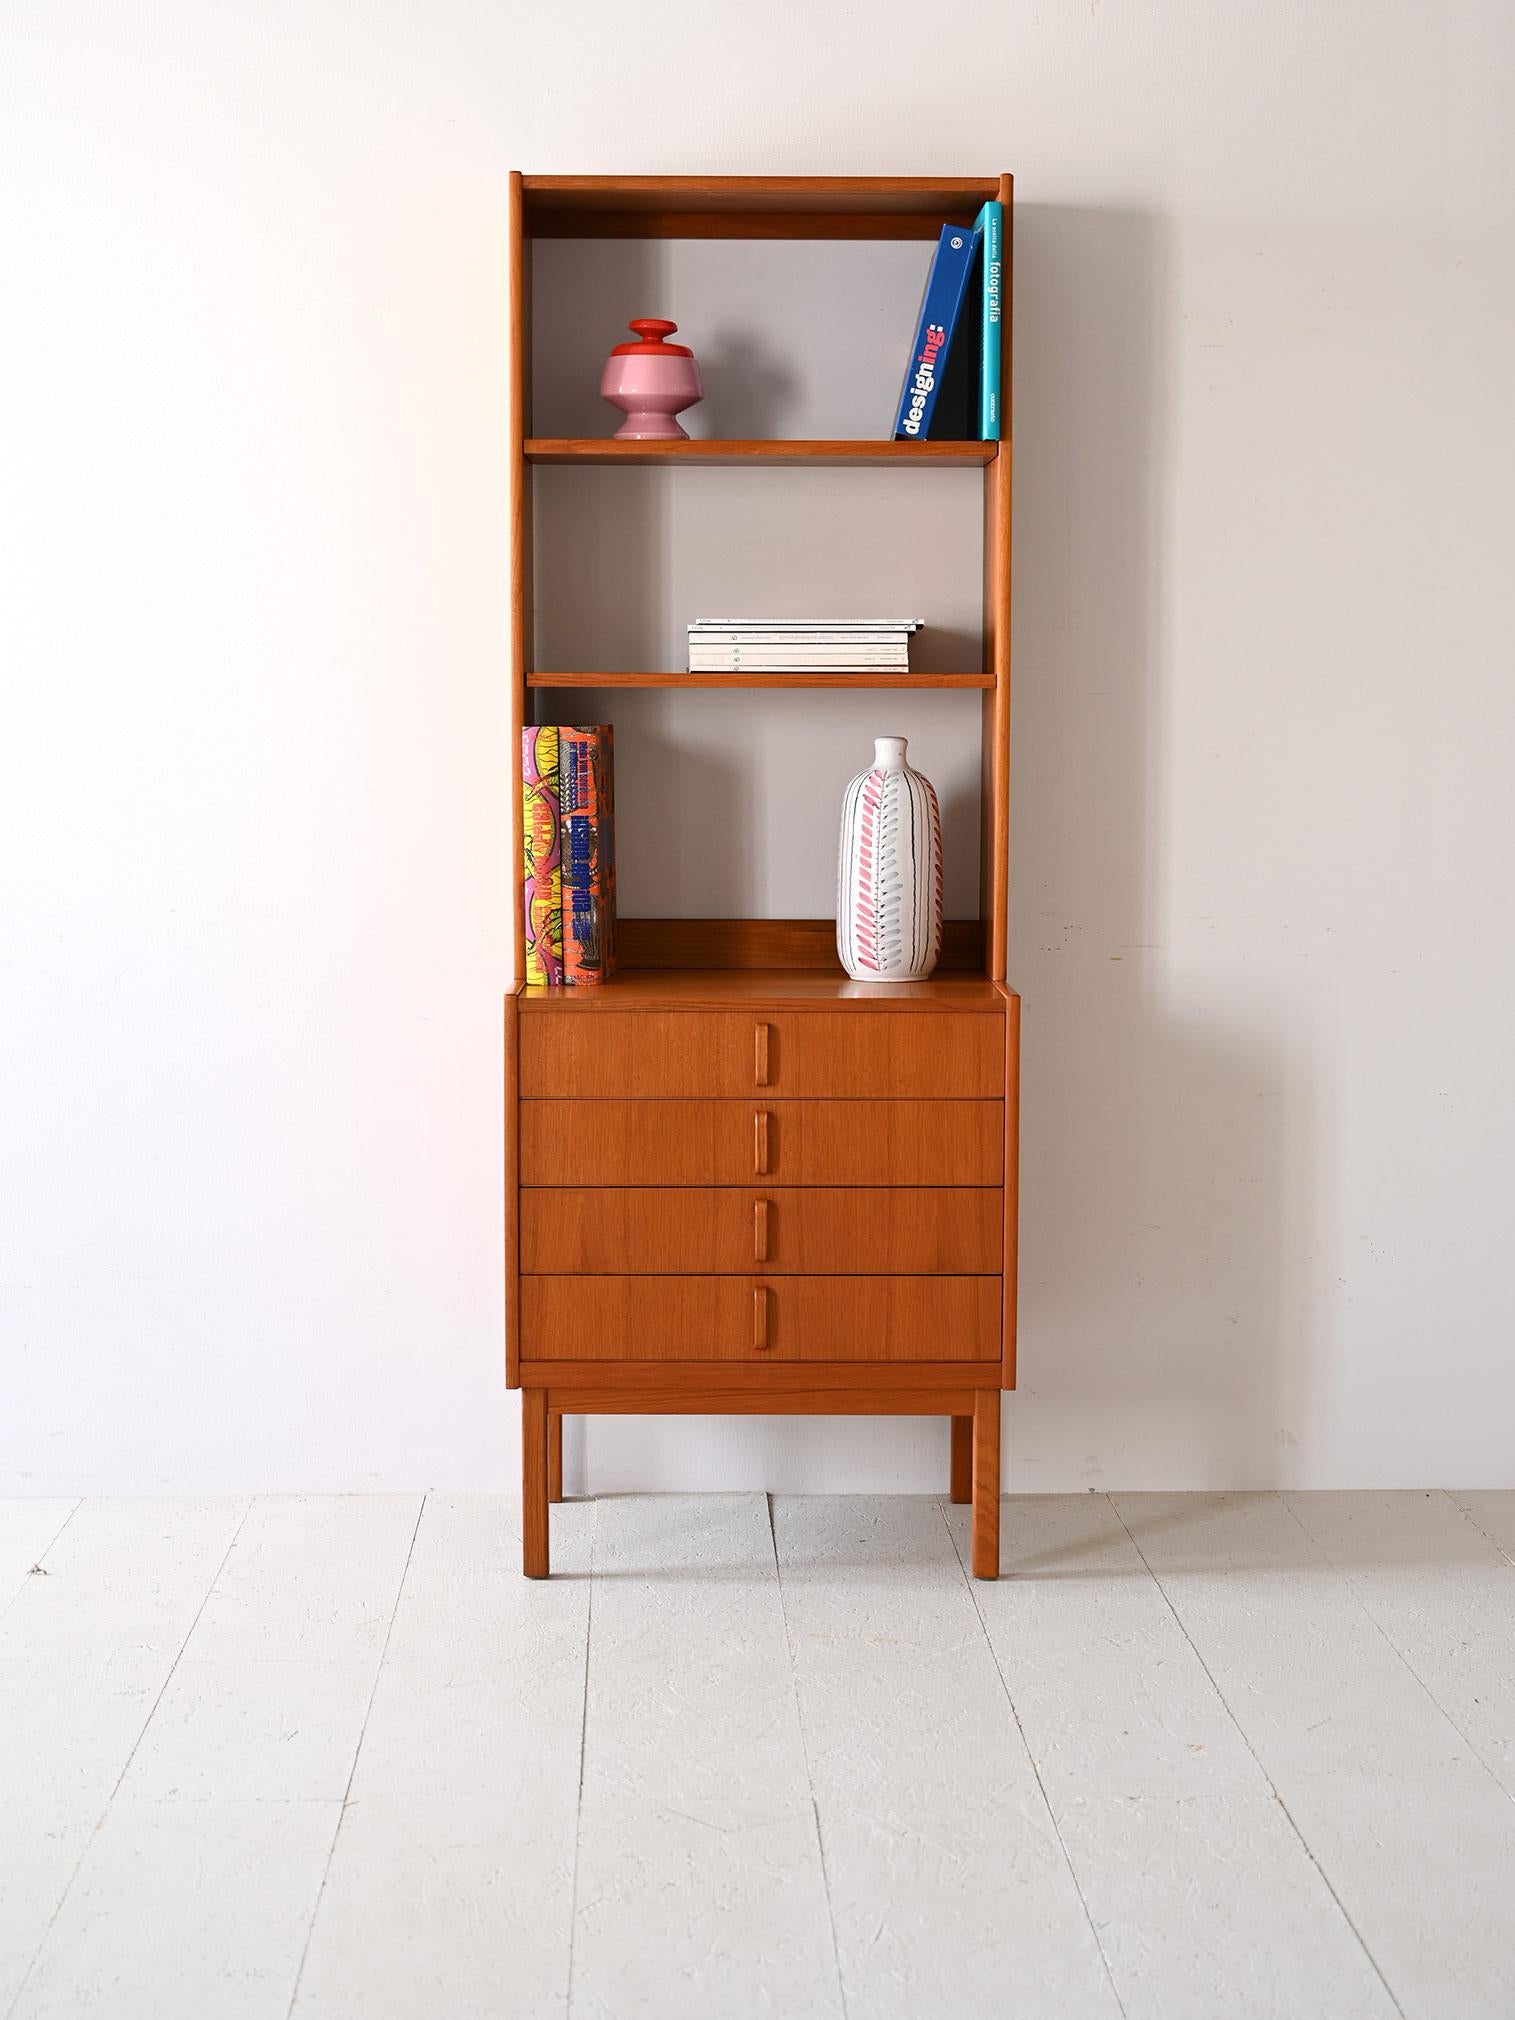 This 1964 Scandinavian bookcase, constructed of teak wood, combines elegance and practicality. At the bottom, four drawers with handles carved directly into the wood provide space for discreet storage, while the top features two adjustable shelves,